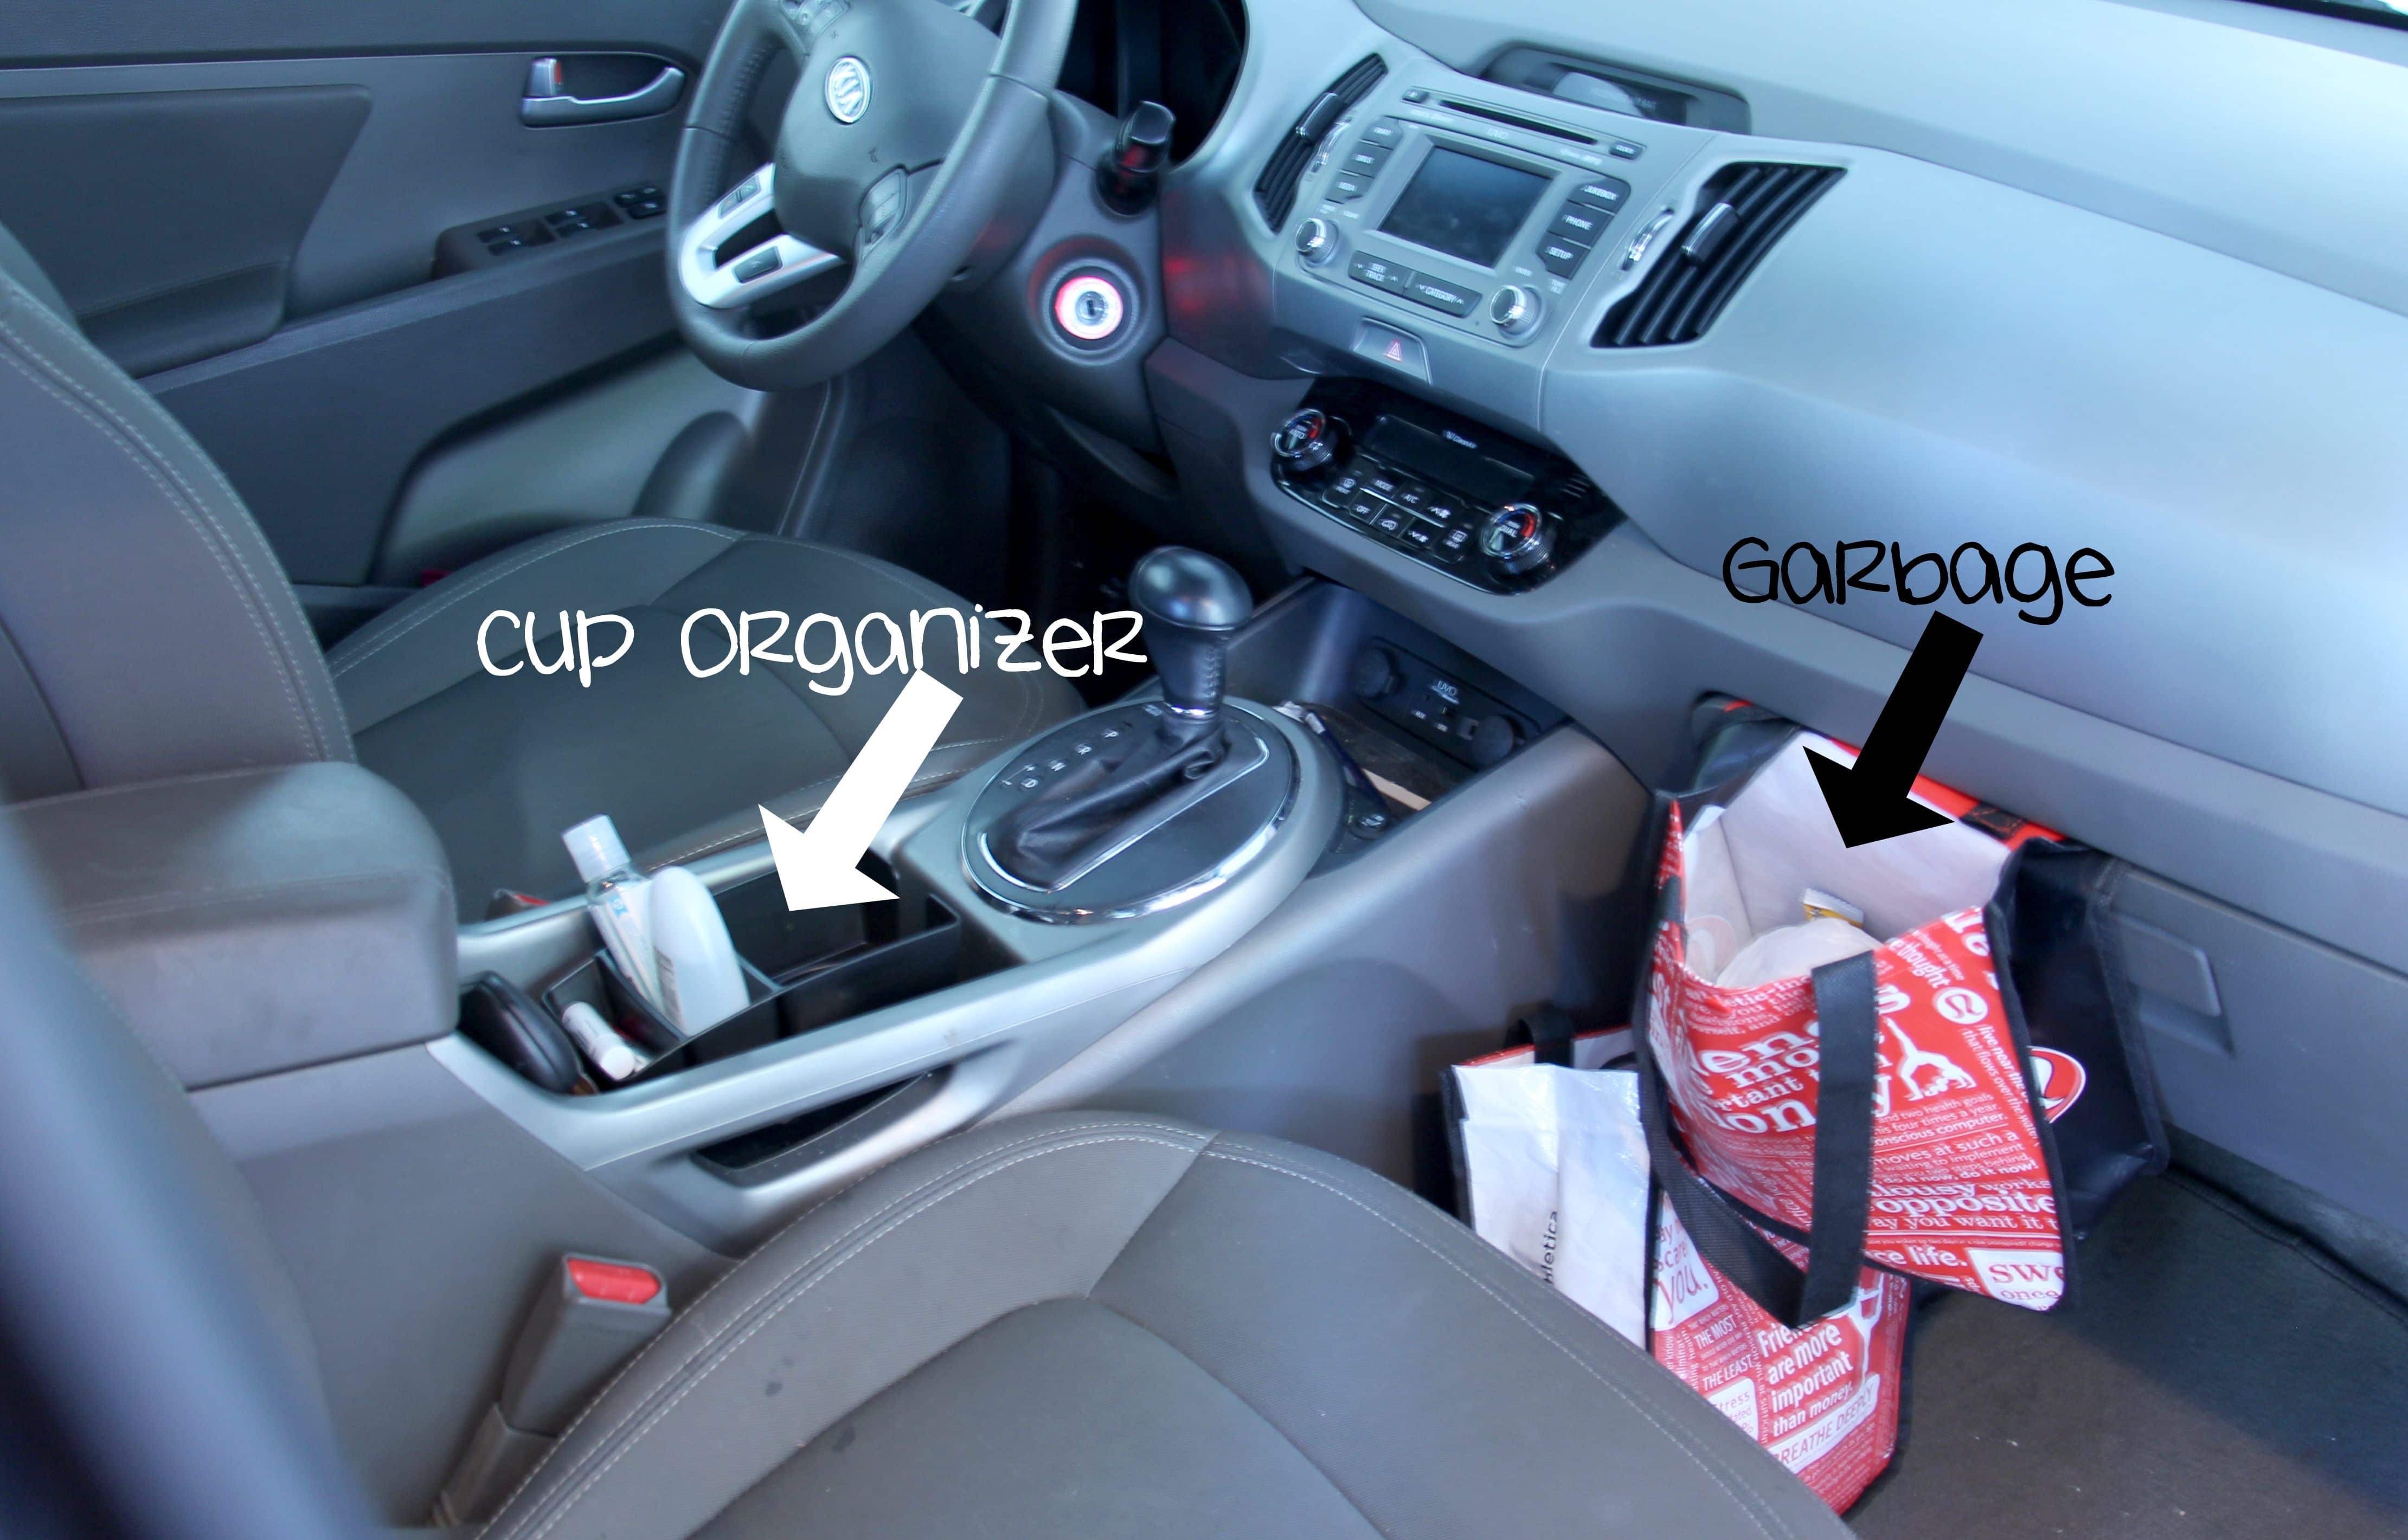 Keeping Your Car Organized With Kids - Inside Car